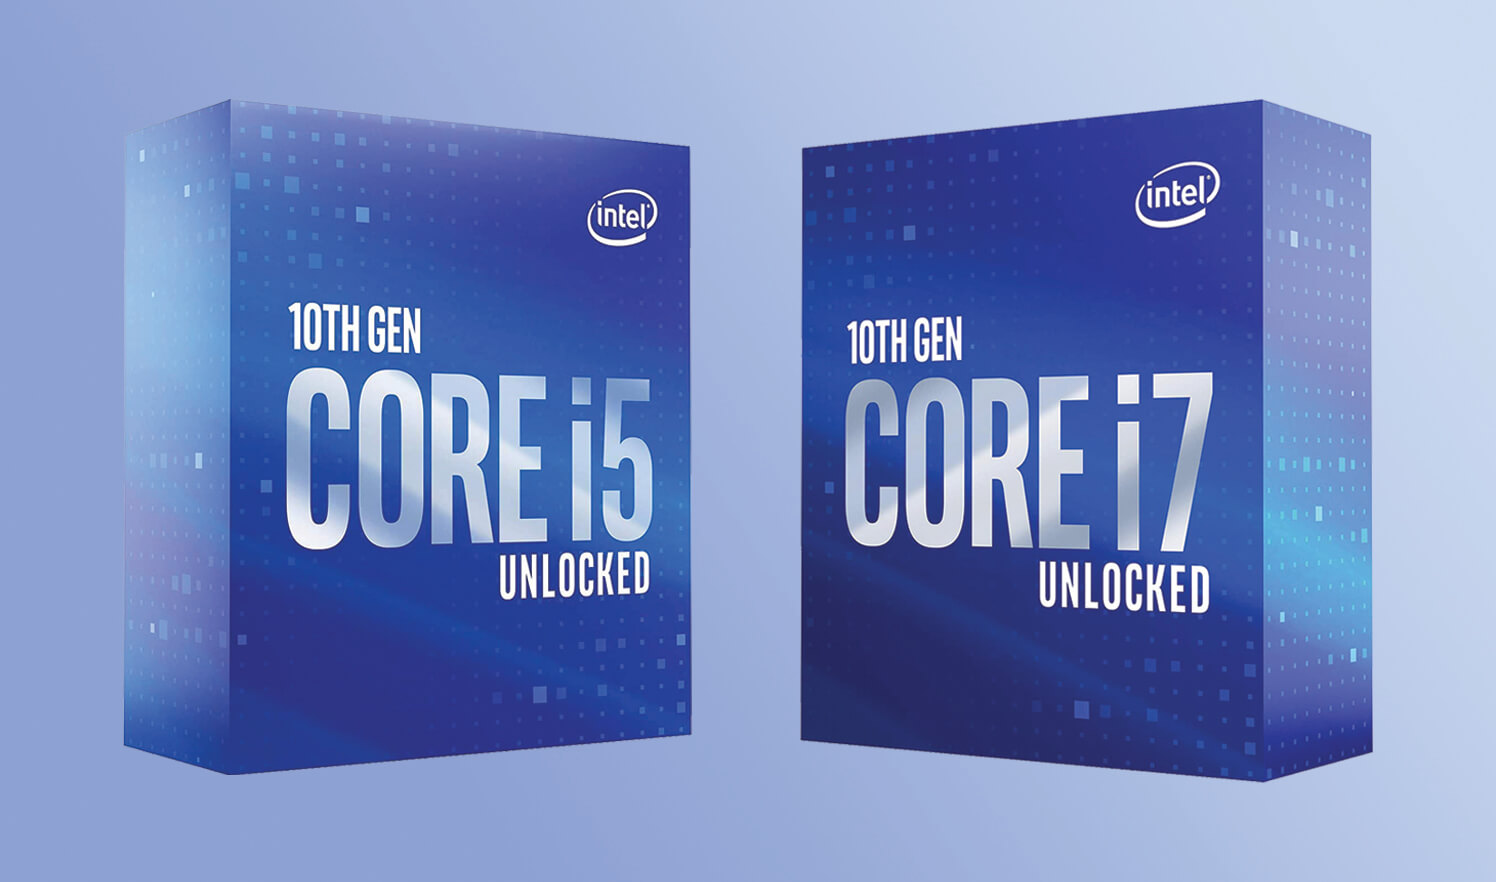 Best Intel Processors for Gaming